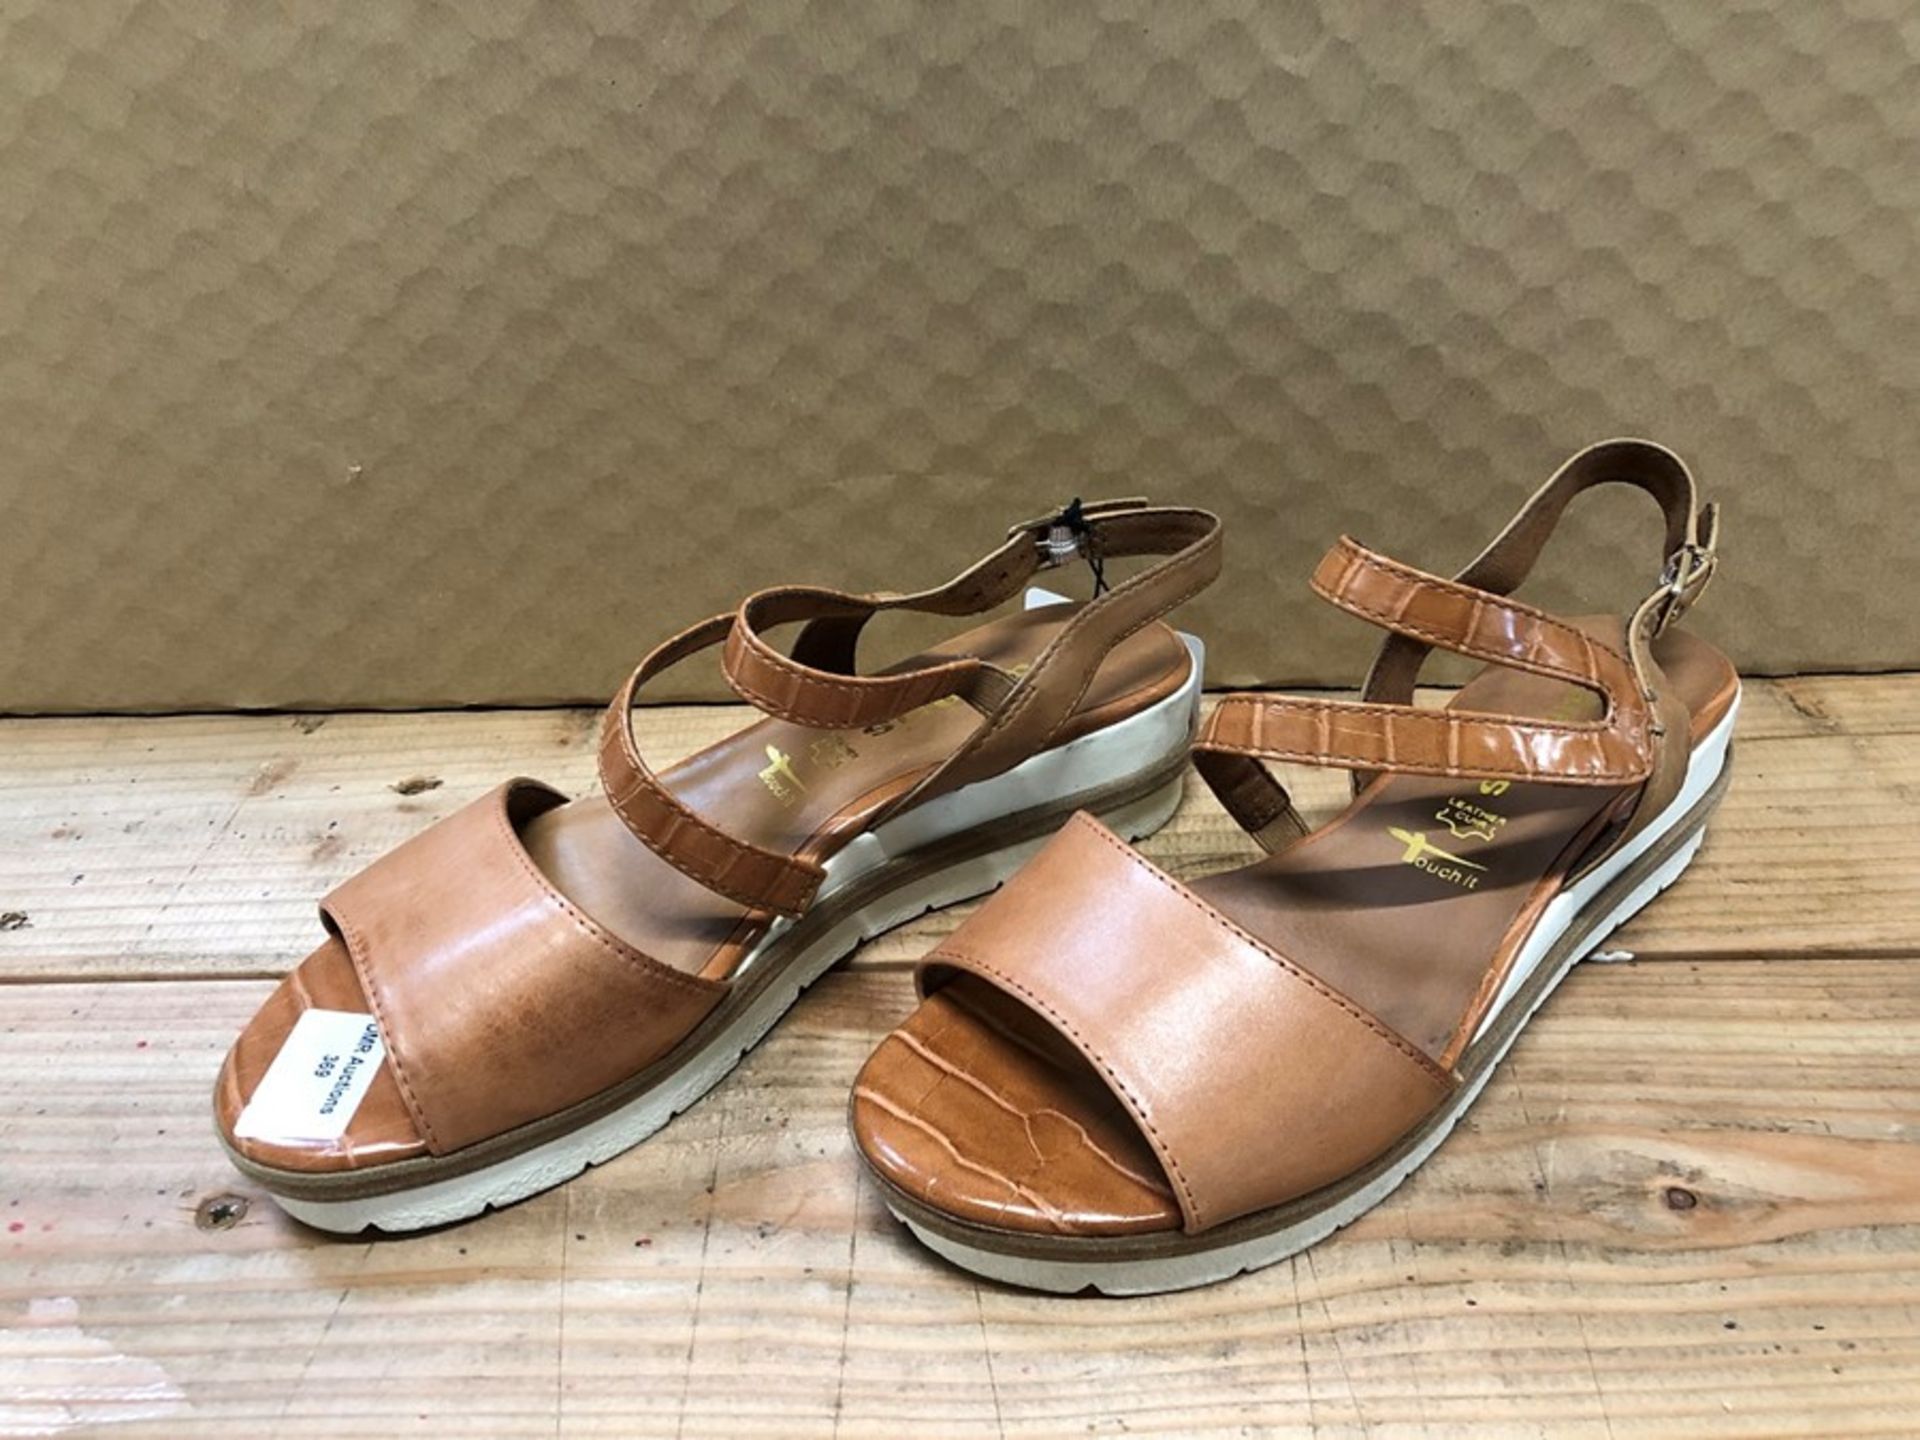 1 LOT TO CONTAIN 1 PAIR OF TAMARIS EDA LEATHER WEDGE SANDALS BROWN / LADIES SIZE 7